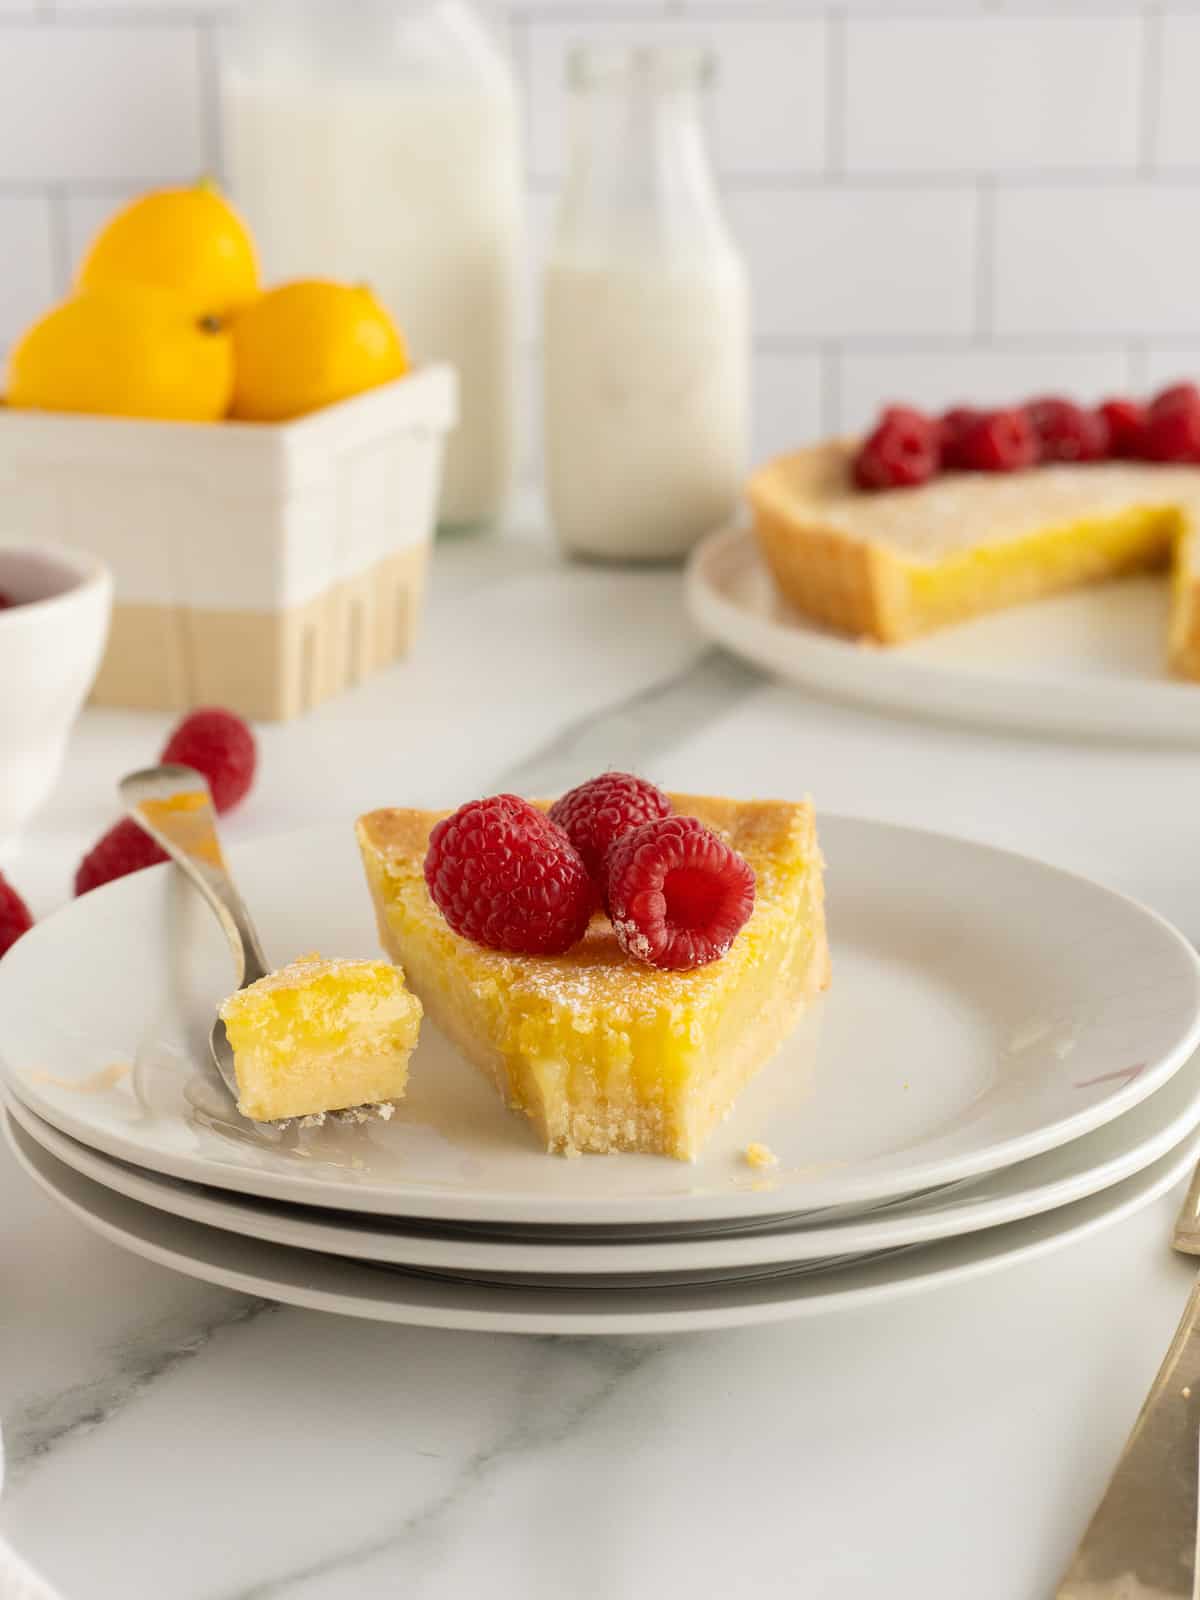 A slice of lemon tart topped with raspberries and a fork on a stack of white plates.